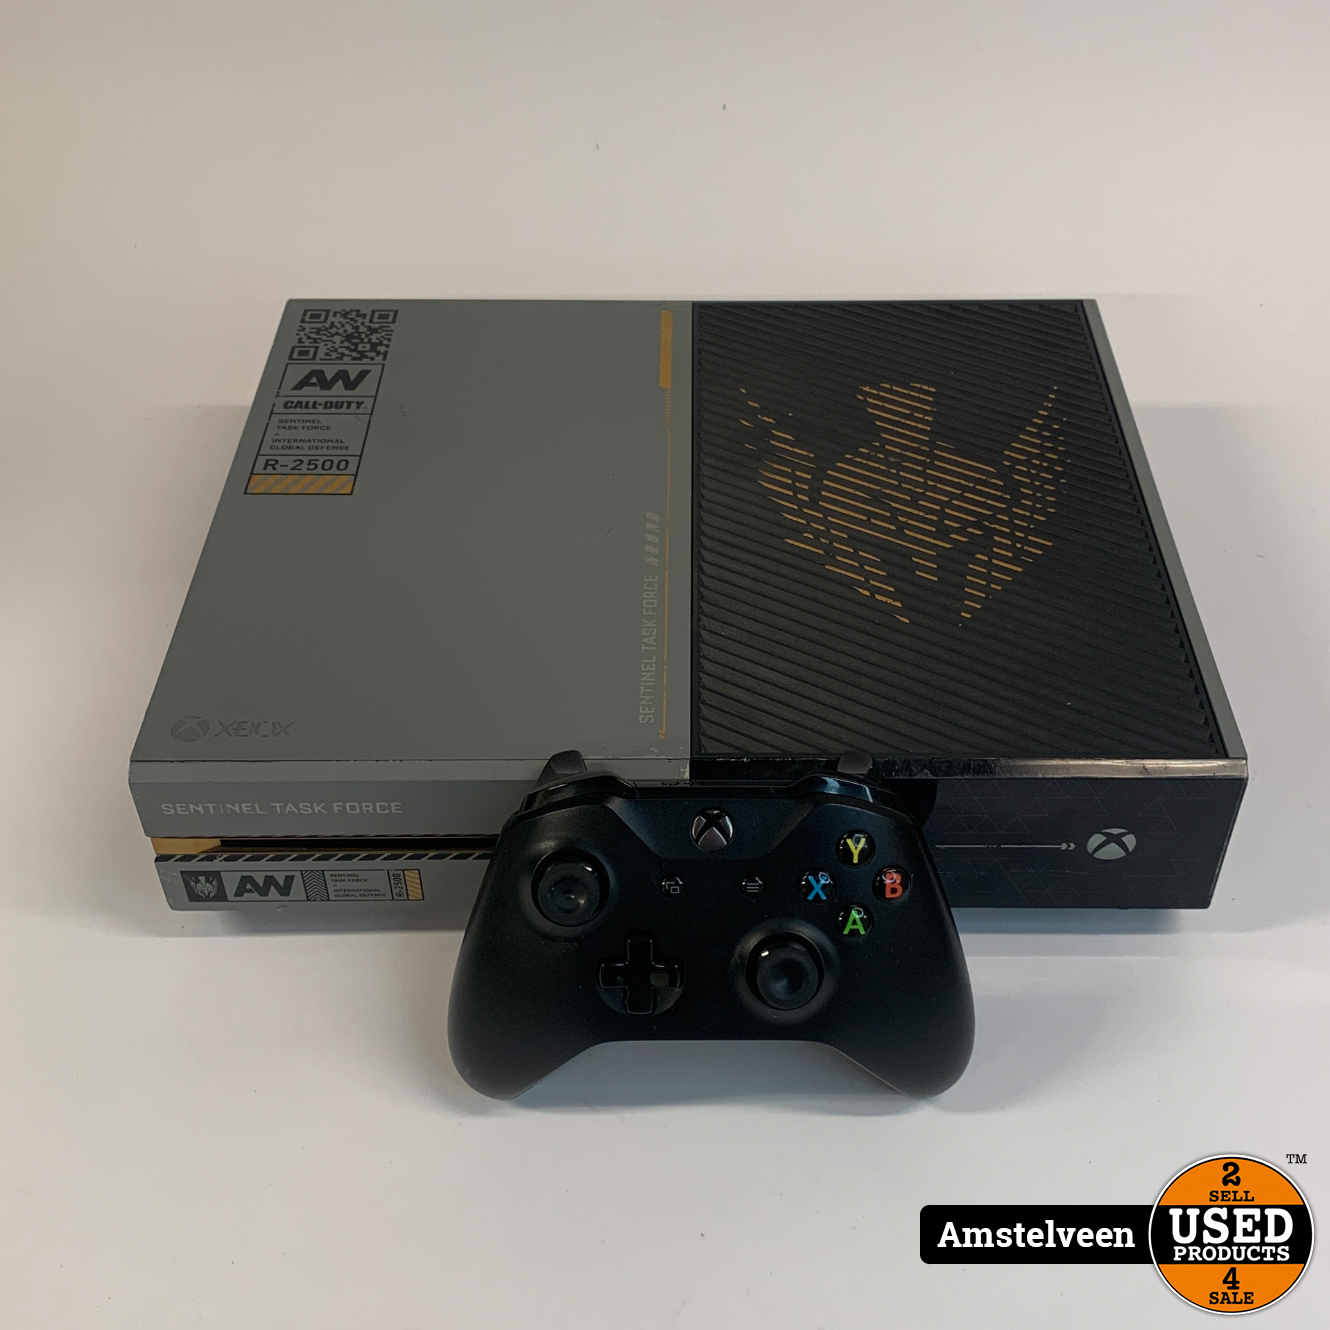 alarm Voorvoegsel Staat xbox Xbox One Call Of Duty: Advanced Warfare (1TB) - Limited Edition - Used  Products Amstelveen